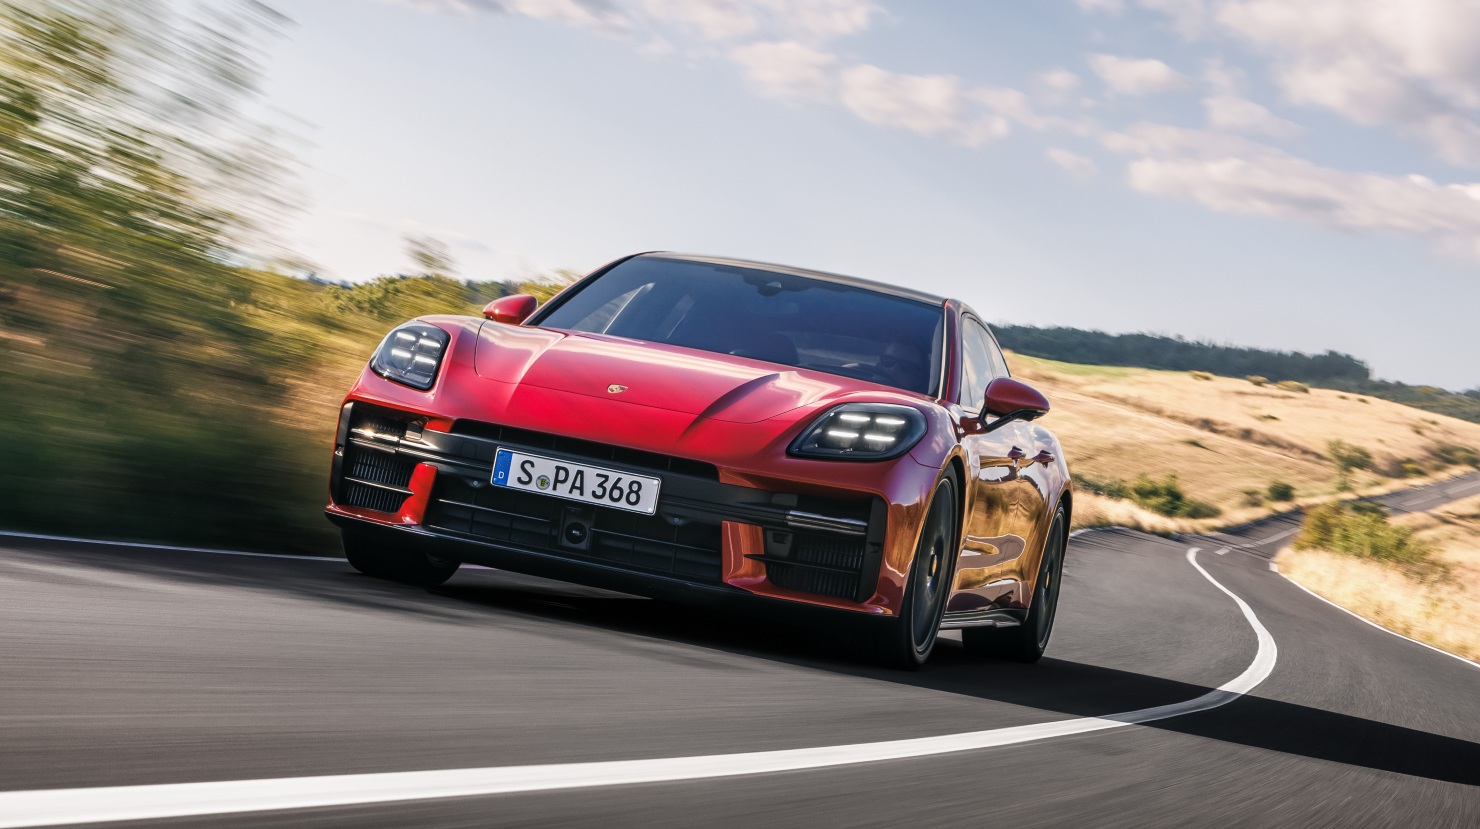 2025 Porsche Panamera Turbo S E-hybrid And Gts Unmatched Power And Performance Unveiled